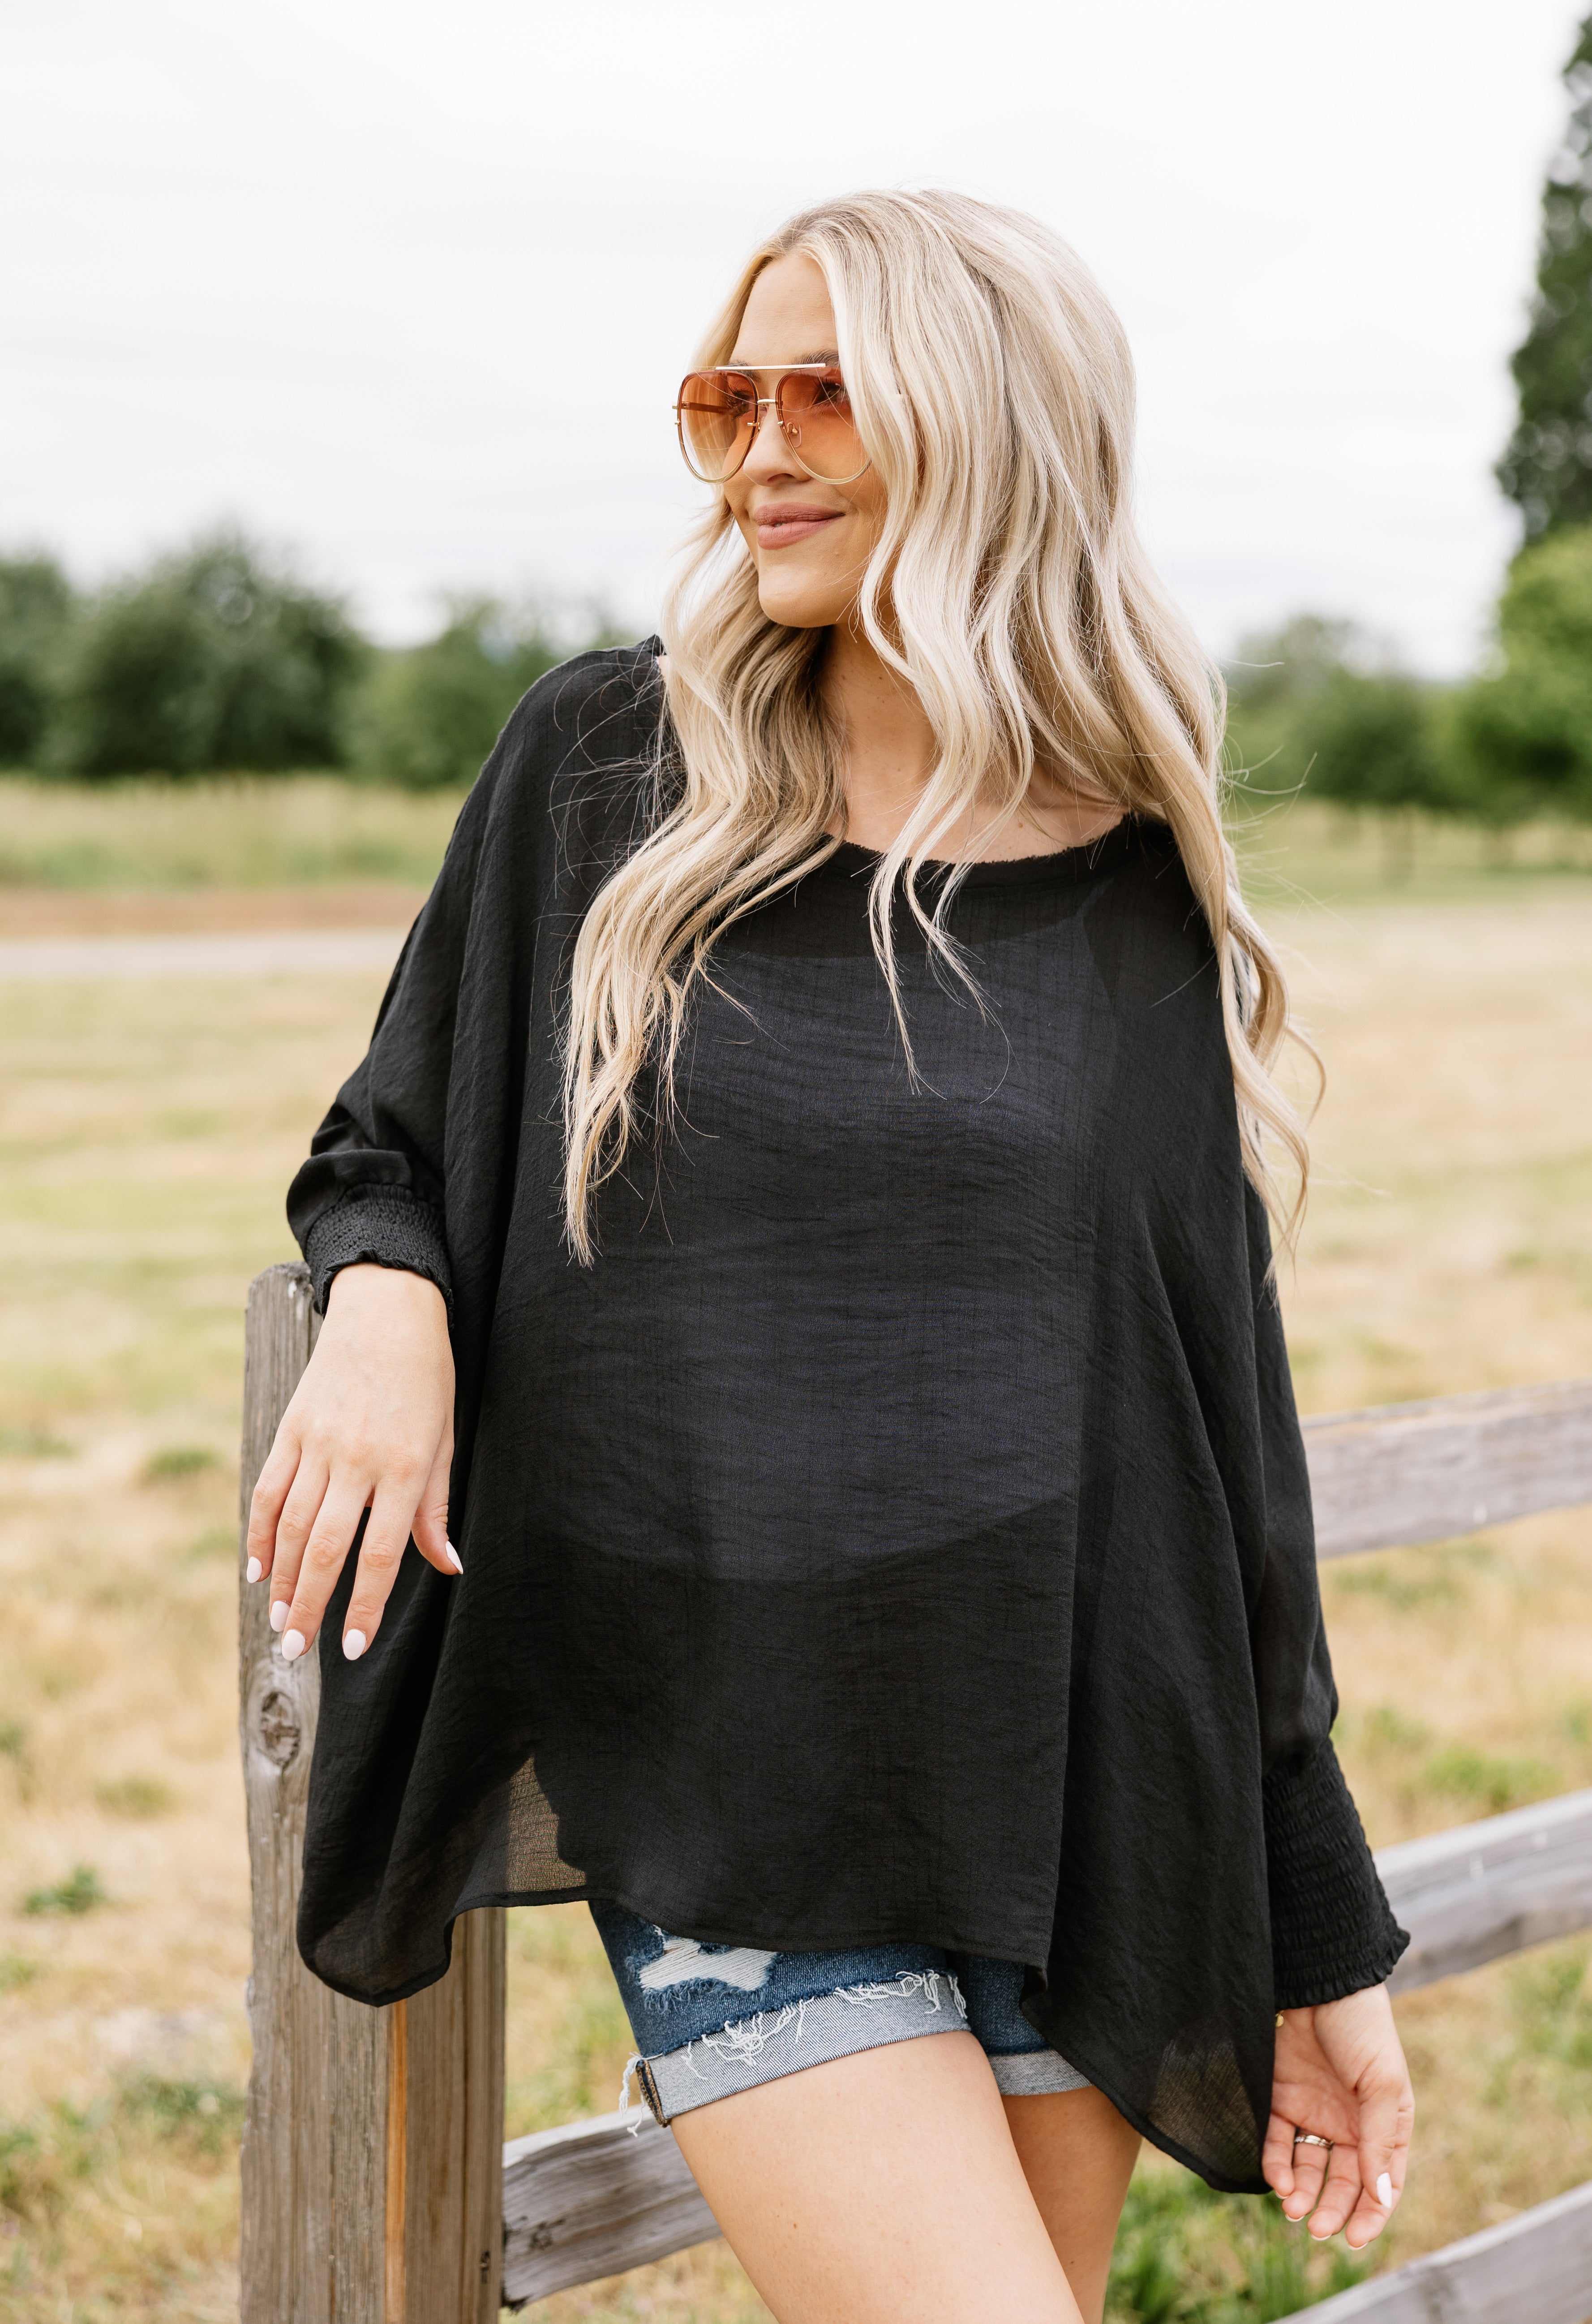 Easy Breezy Top - BLACK - willows clothing Blouse